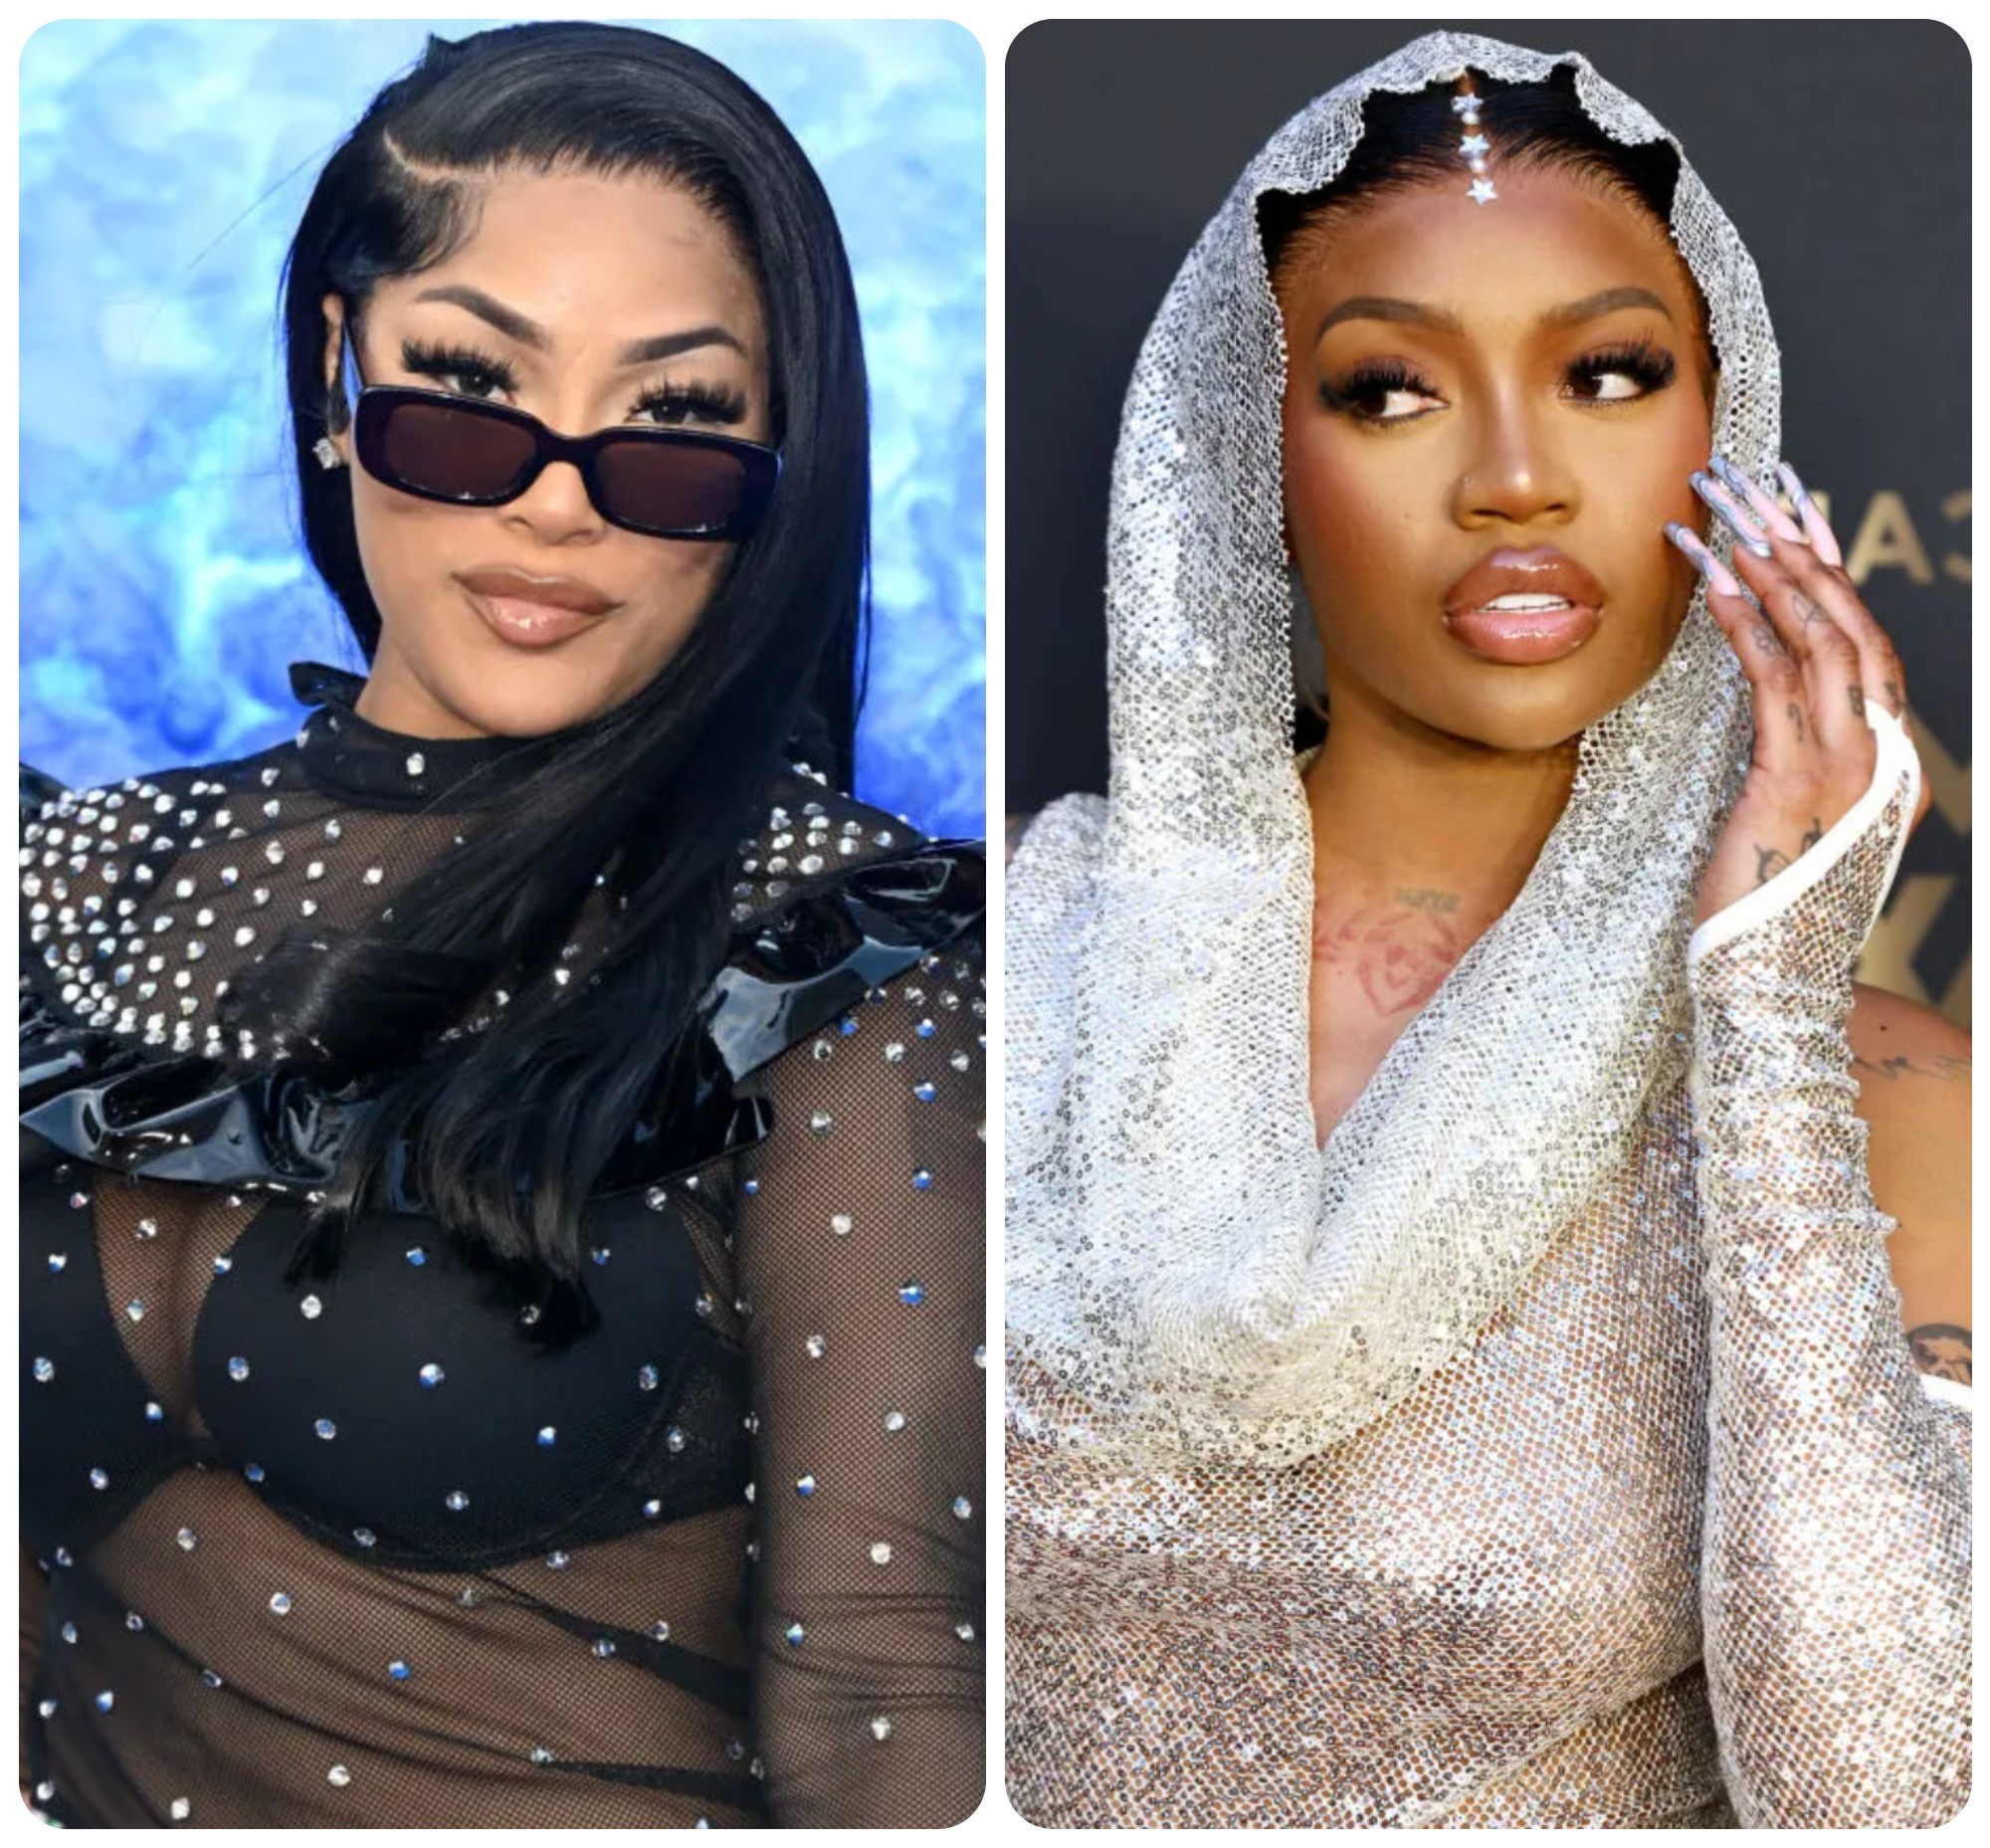 Stefflon Don and Jada Kingdom drop diss tracks aimed at each other